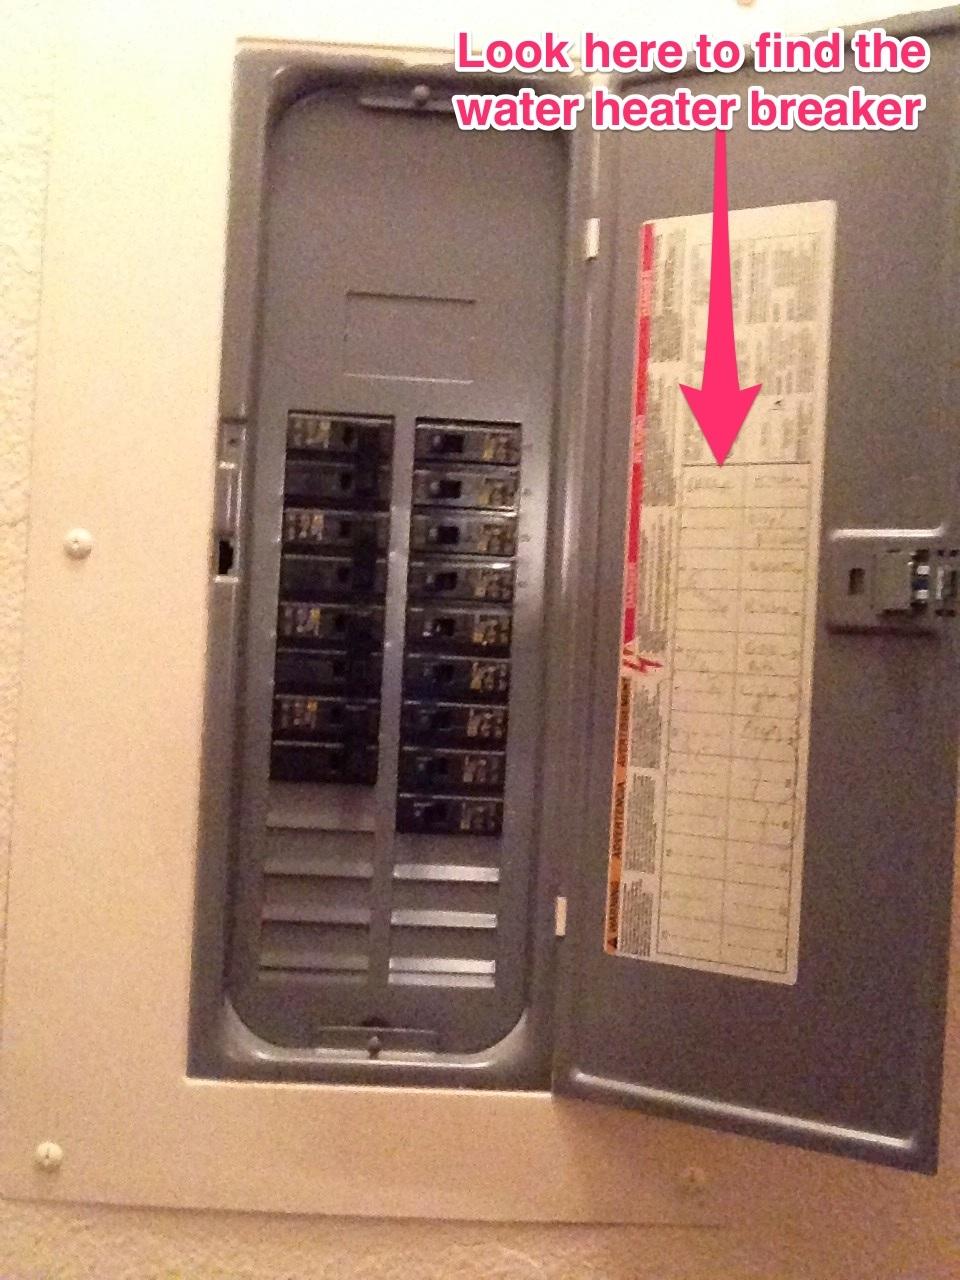 Example of a water heater breaker on an electrical panel